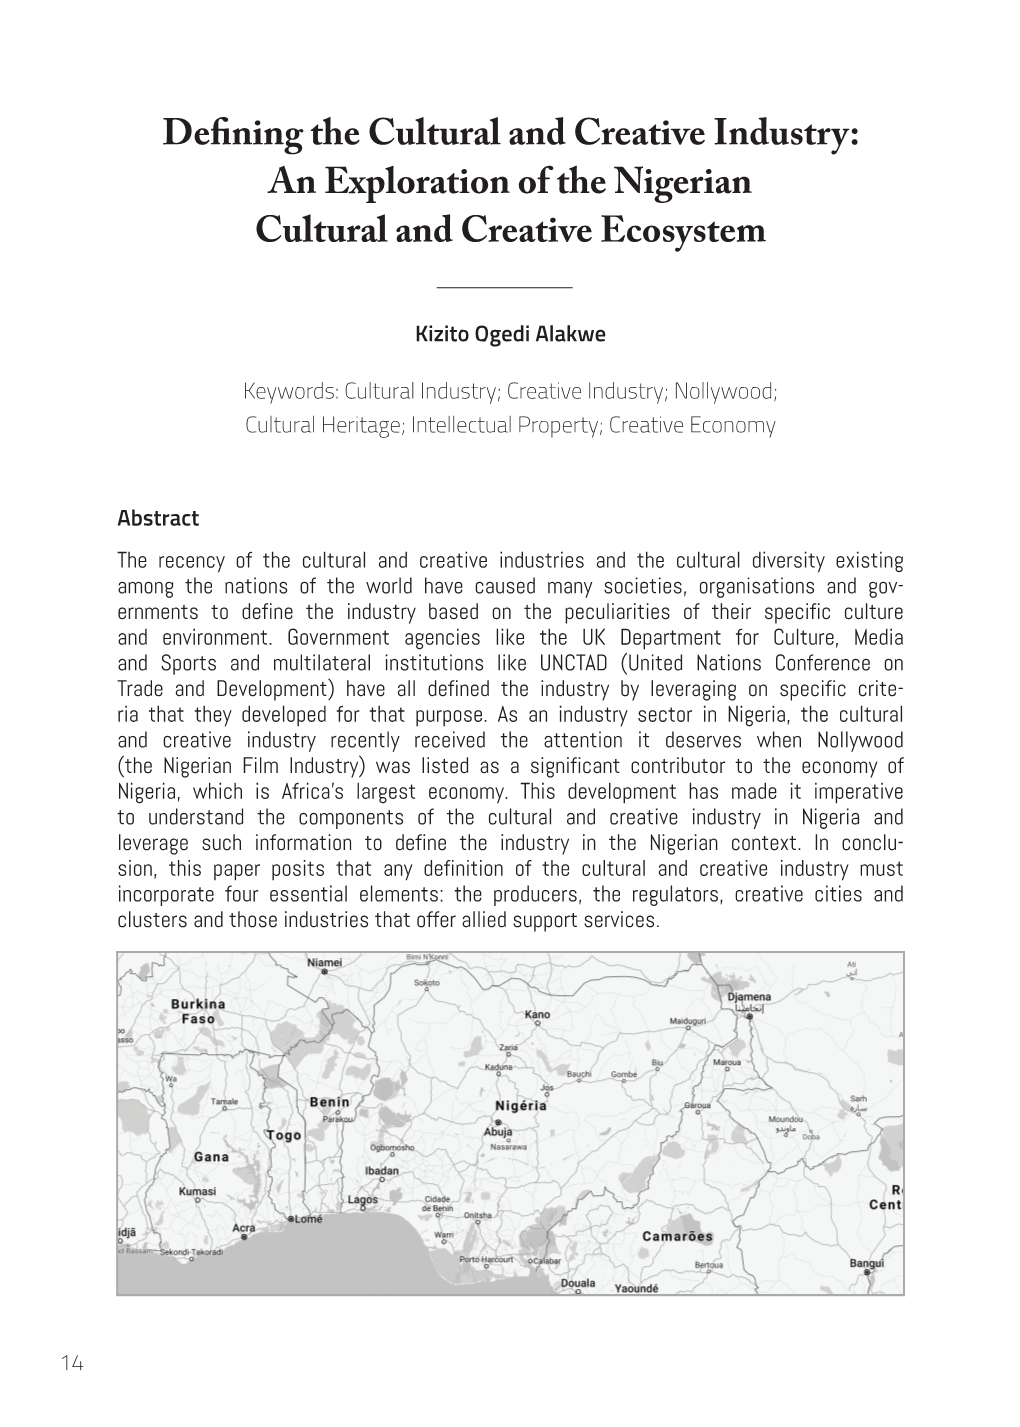 An Exploration of the Nigerian Cultural and Creative Ecosystem